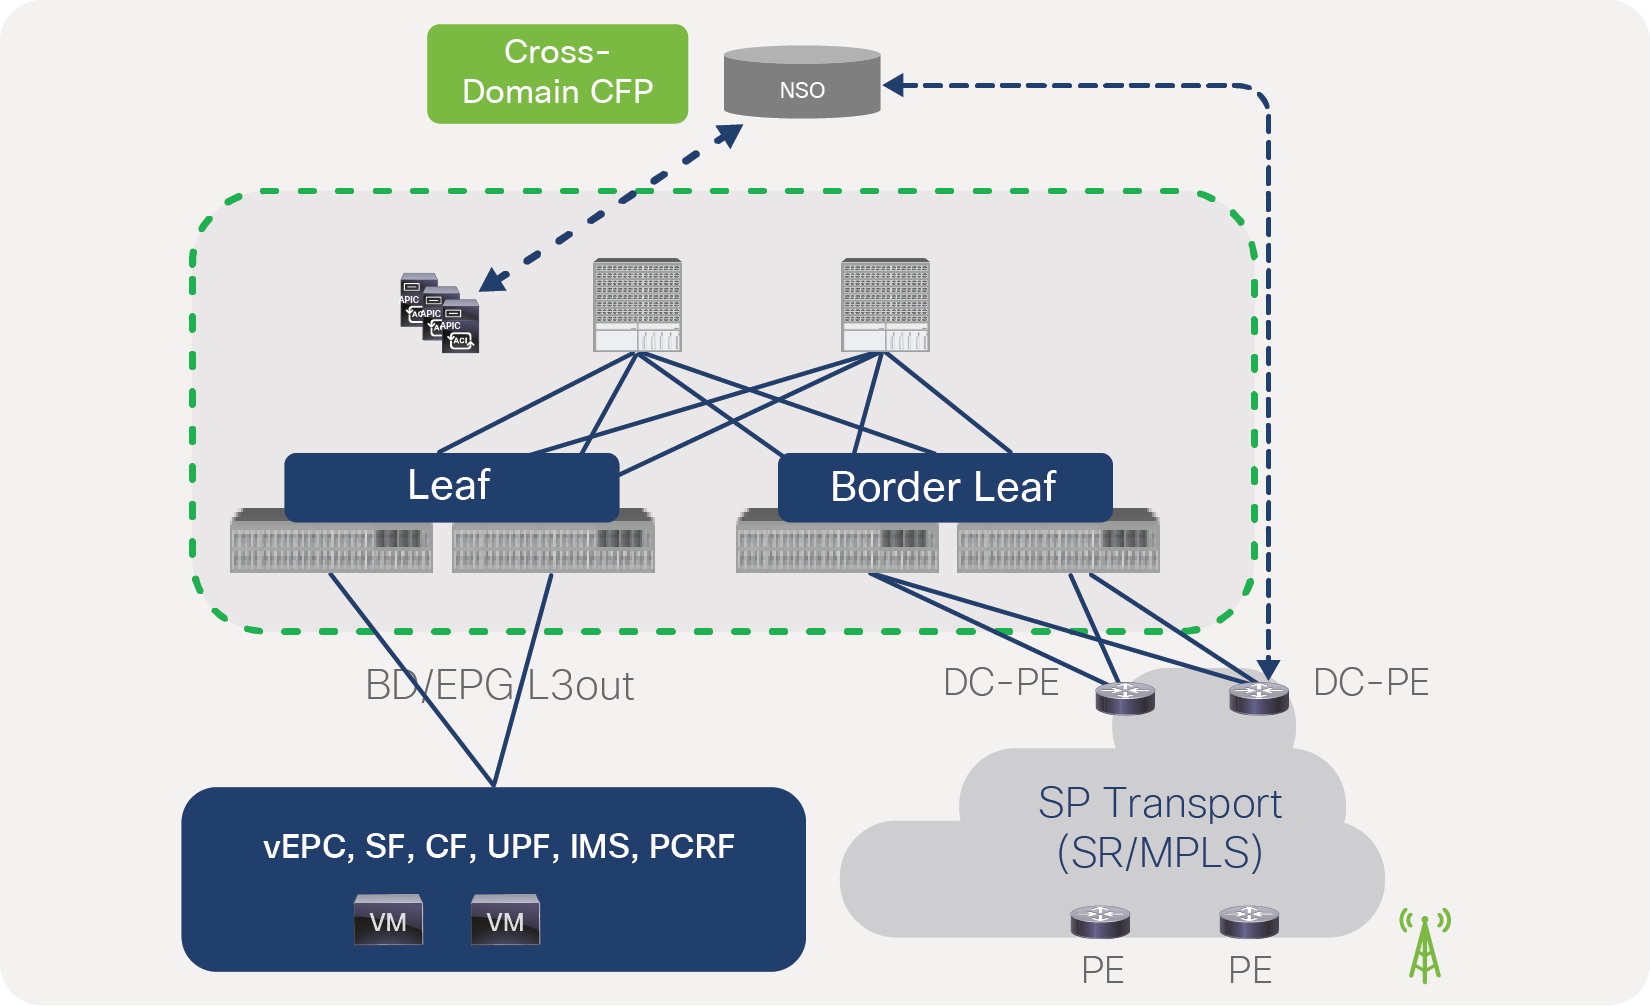 SR/MPLS configuration from NSO across the data center and transport